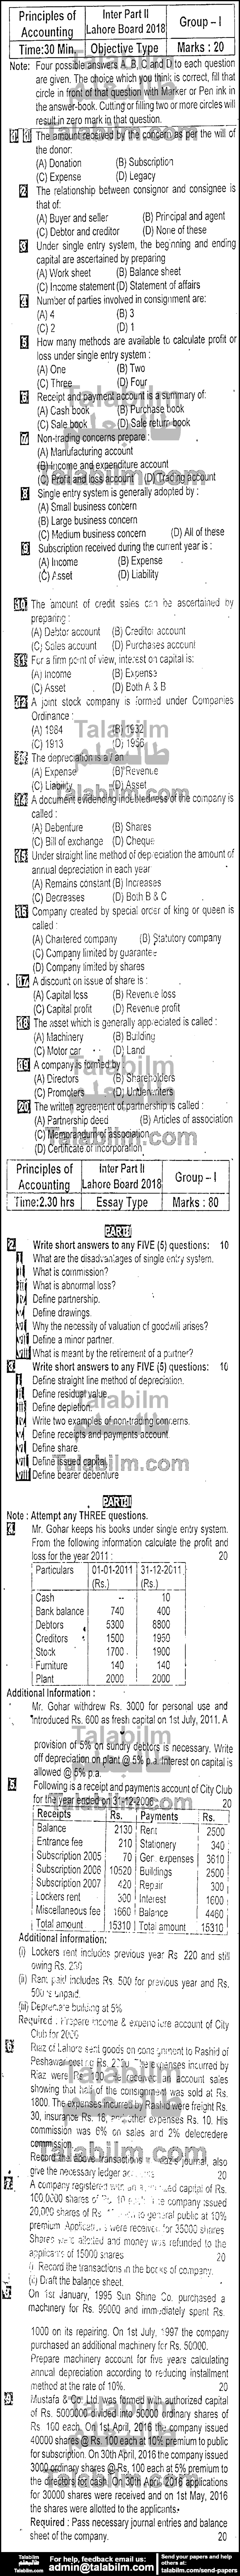 Principles Of Accounting 0 past paper for Group-I 2018